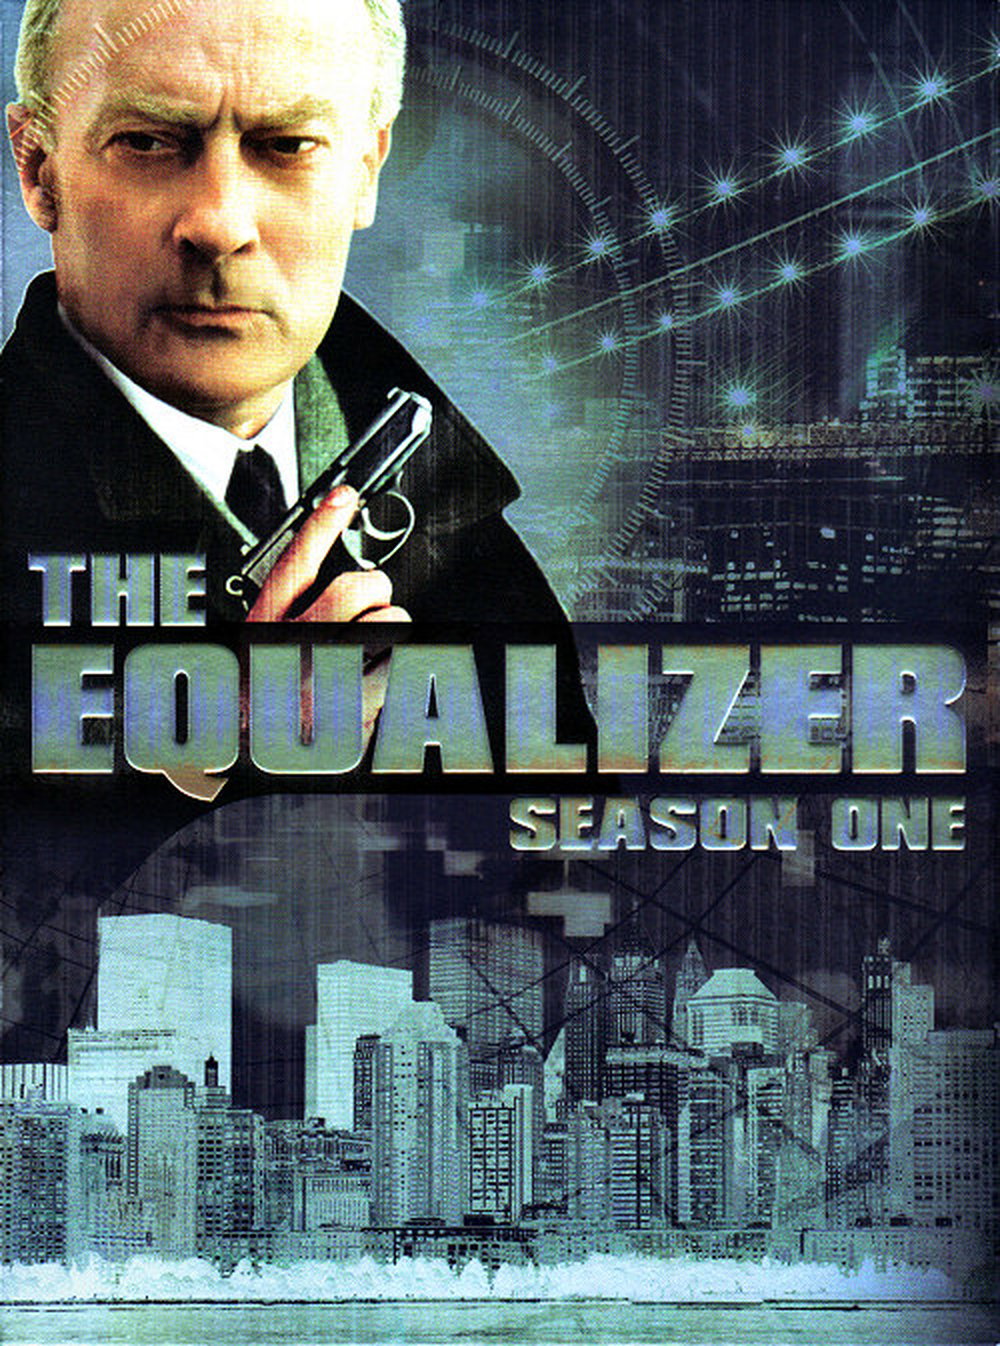 ron o neal on the equalizer